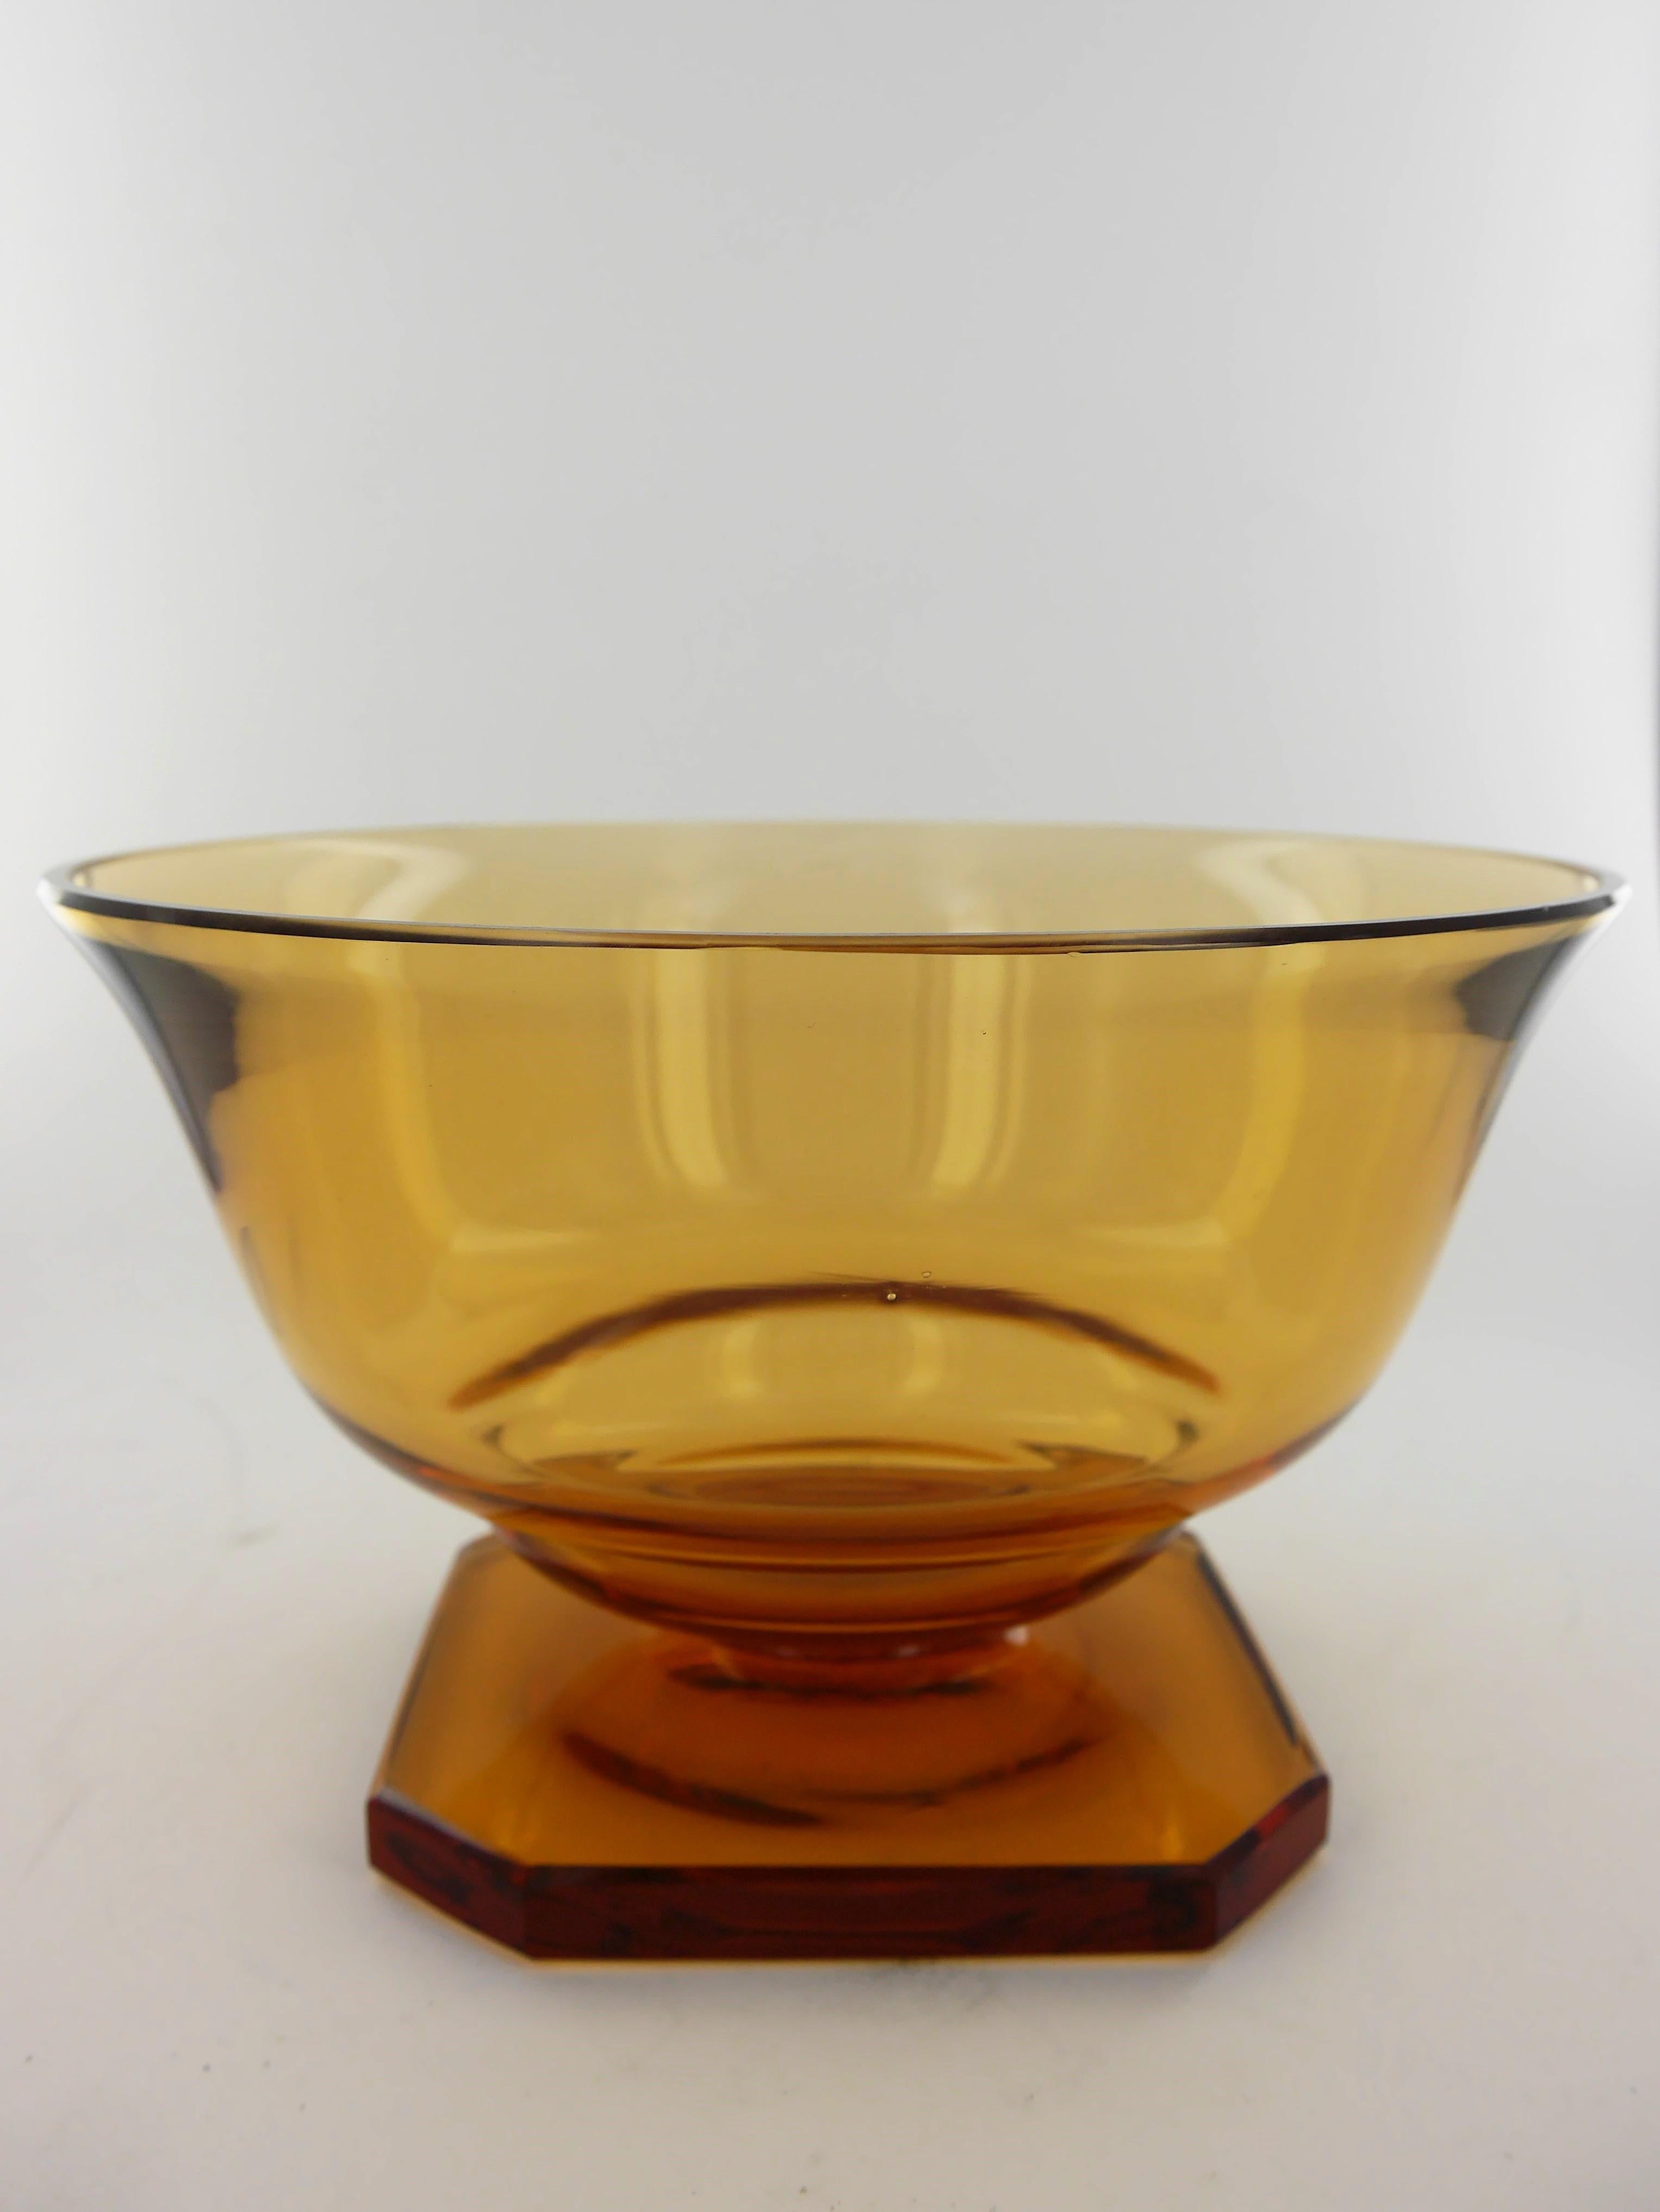 Vase or cup, amber coloured, in Daum glass or crystal.
Signed Daum, cross of Lorraine, Nancy.
Art Deco period, 1920s-1930s, France.